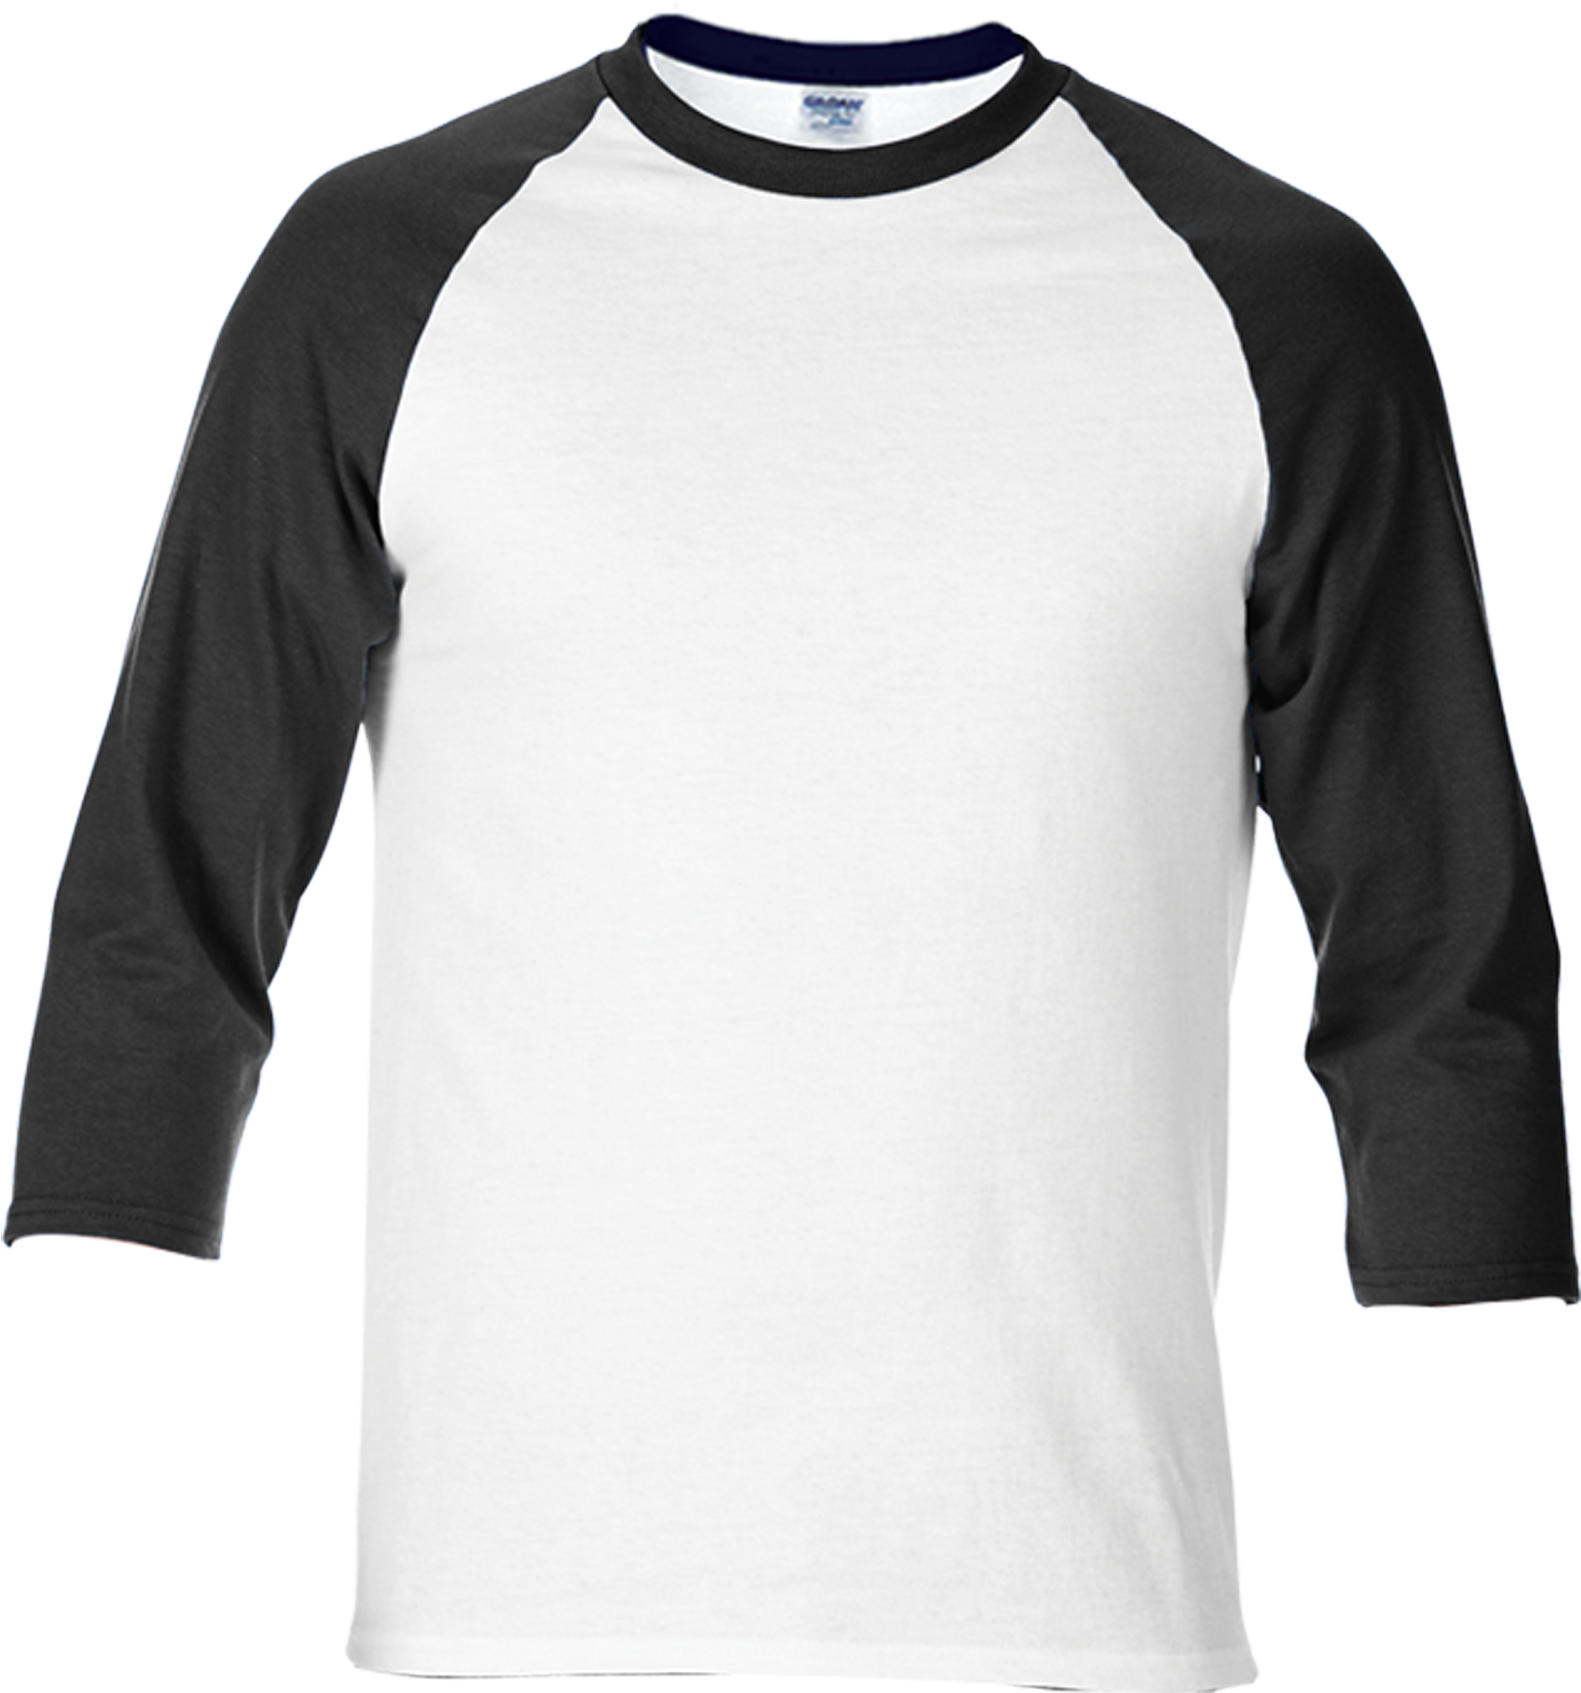 Download A White And Black Polo Shirt [100% Free] - FastPNG